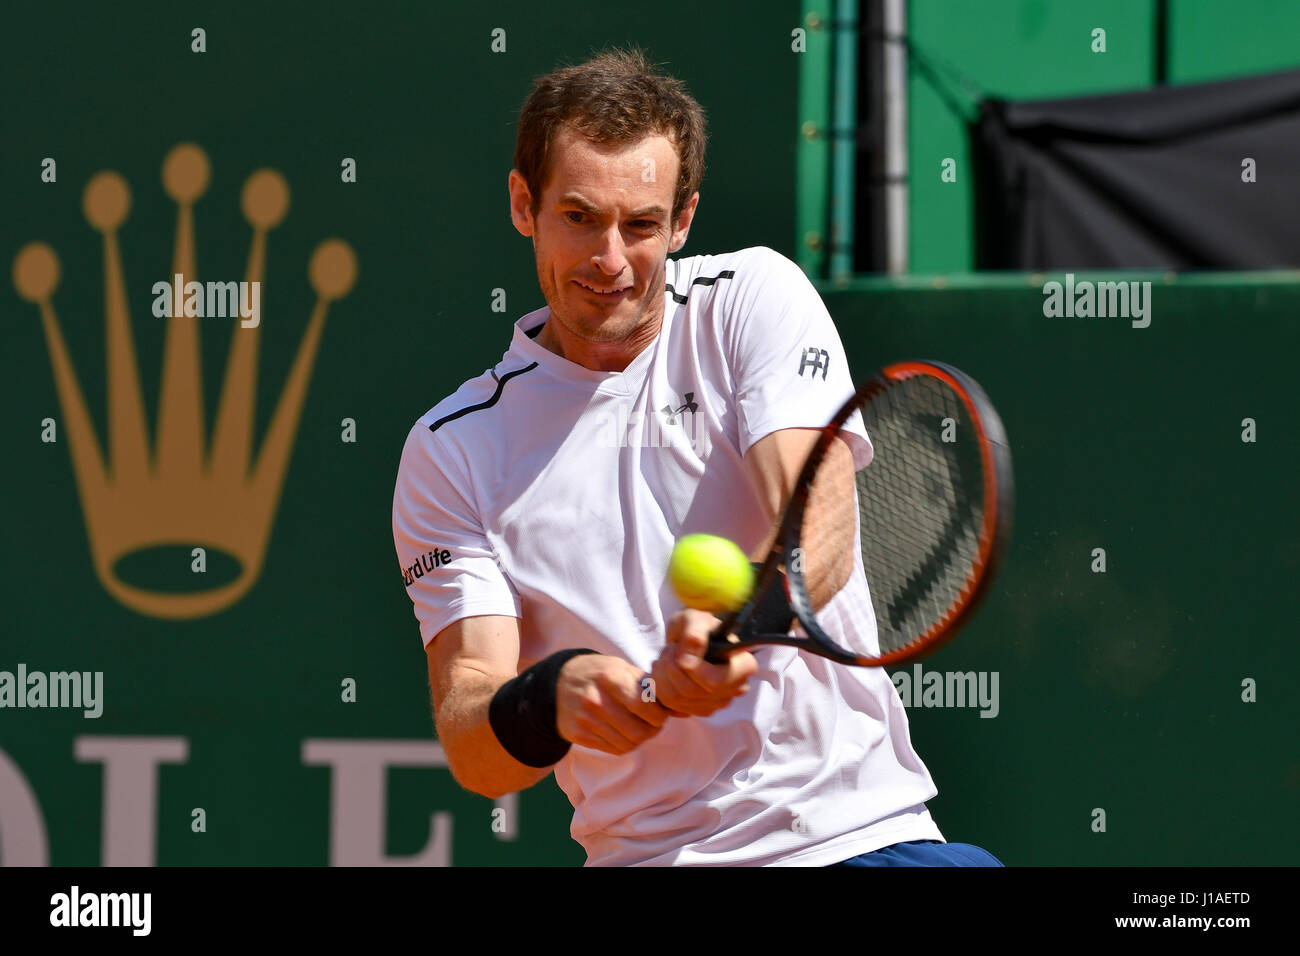 Monte Carlo, Monaco. 19th April, 2017. The Monte-Carlo Rolex Masters tennis  tournament; 2nd round mens match, Andy Murray (gbr) as he beats Muller in 2  sets Credit: Action Plus Sports Images/Alamy Live